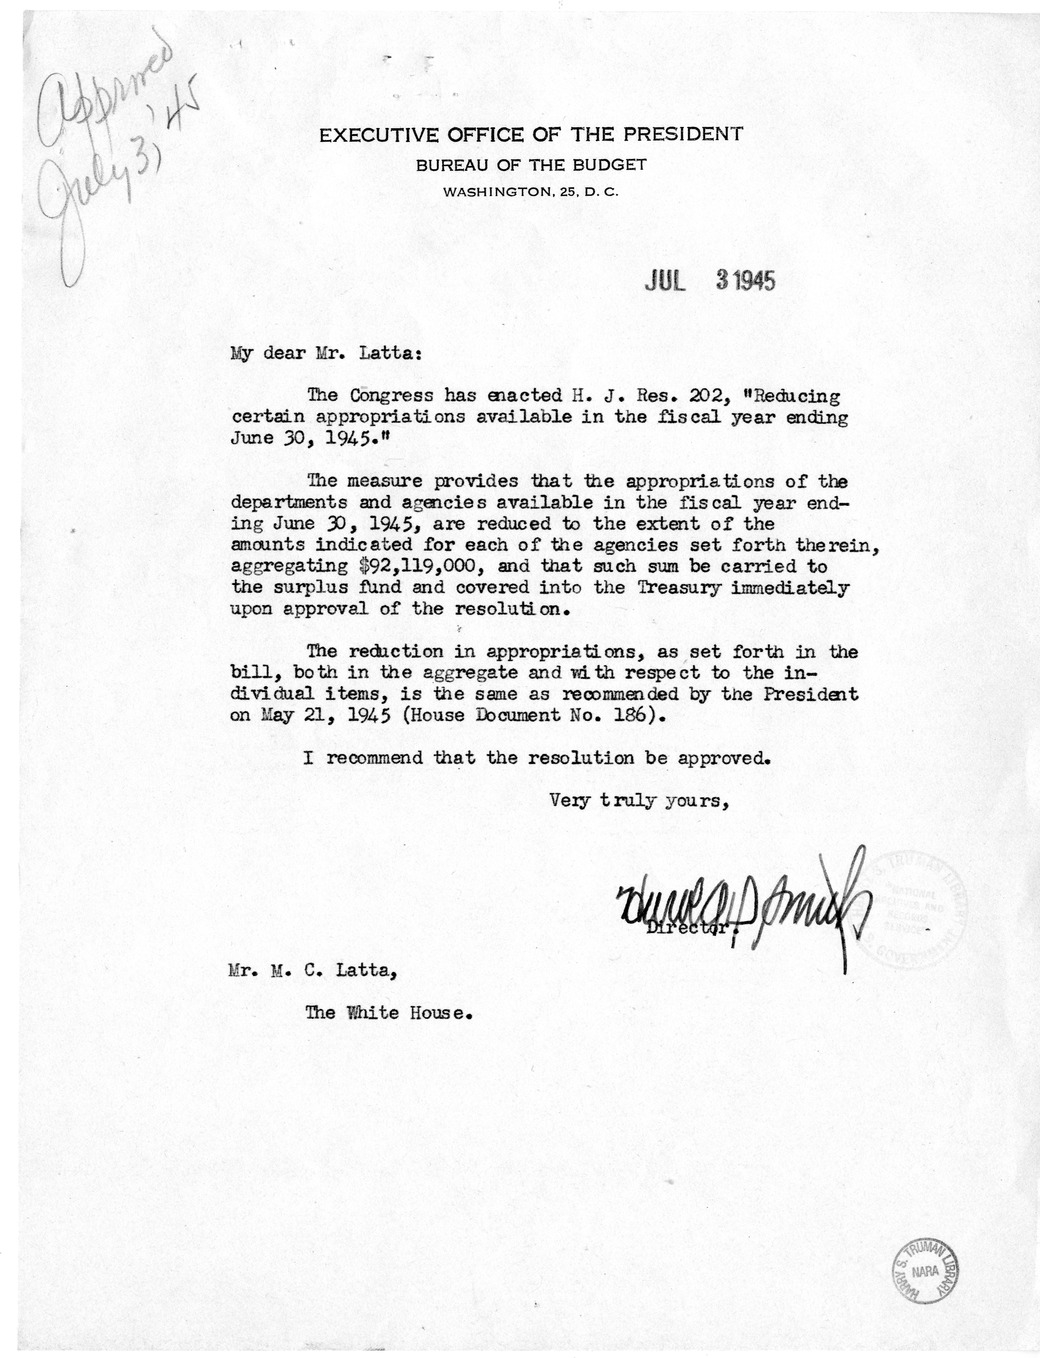 Memorandum from Harold D. Smith to M. C. Latta, H.J. Res. 202, Reducing Certain Appropriations Available in the Fiscal Year Ending June 30, 1945, with Attachments